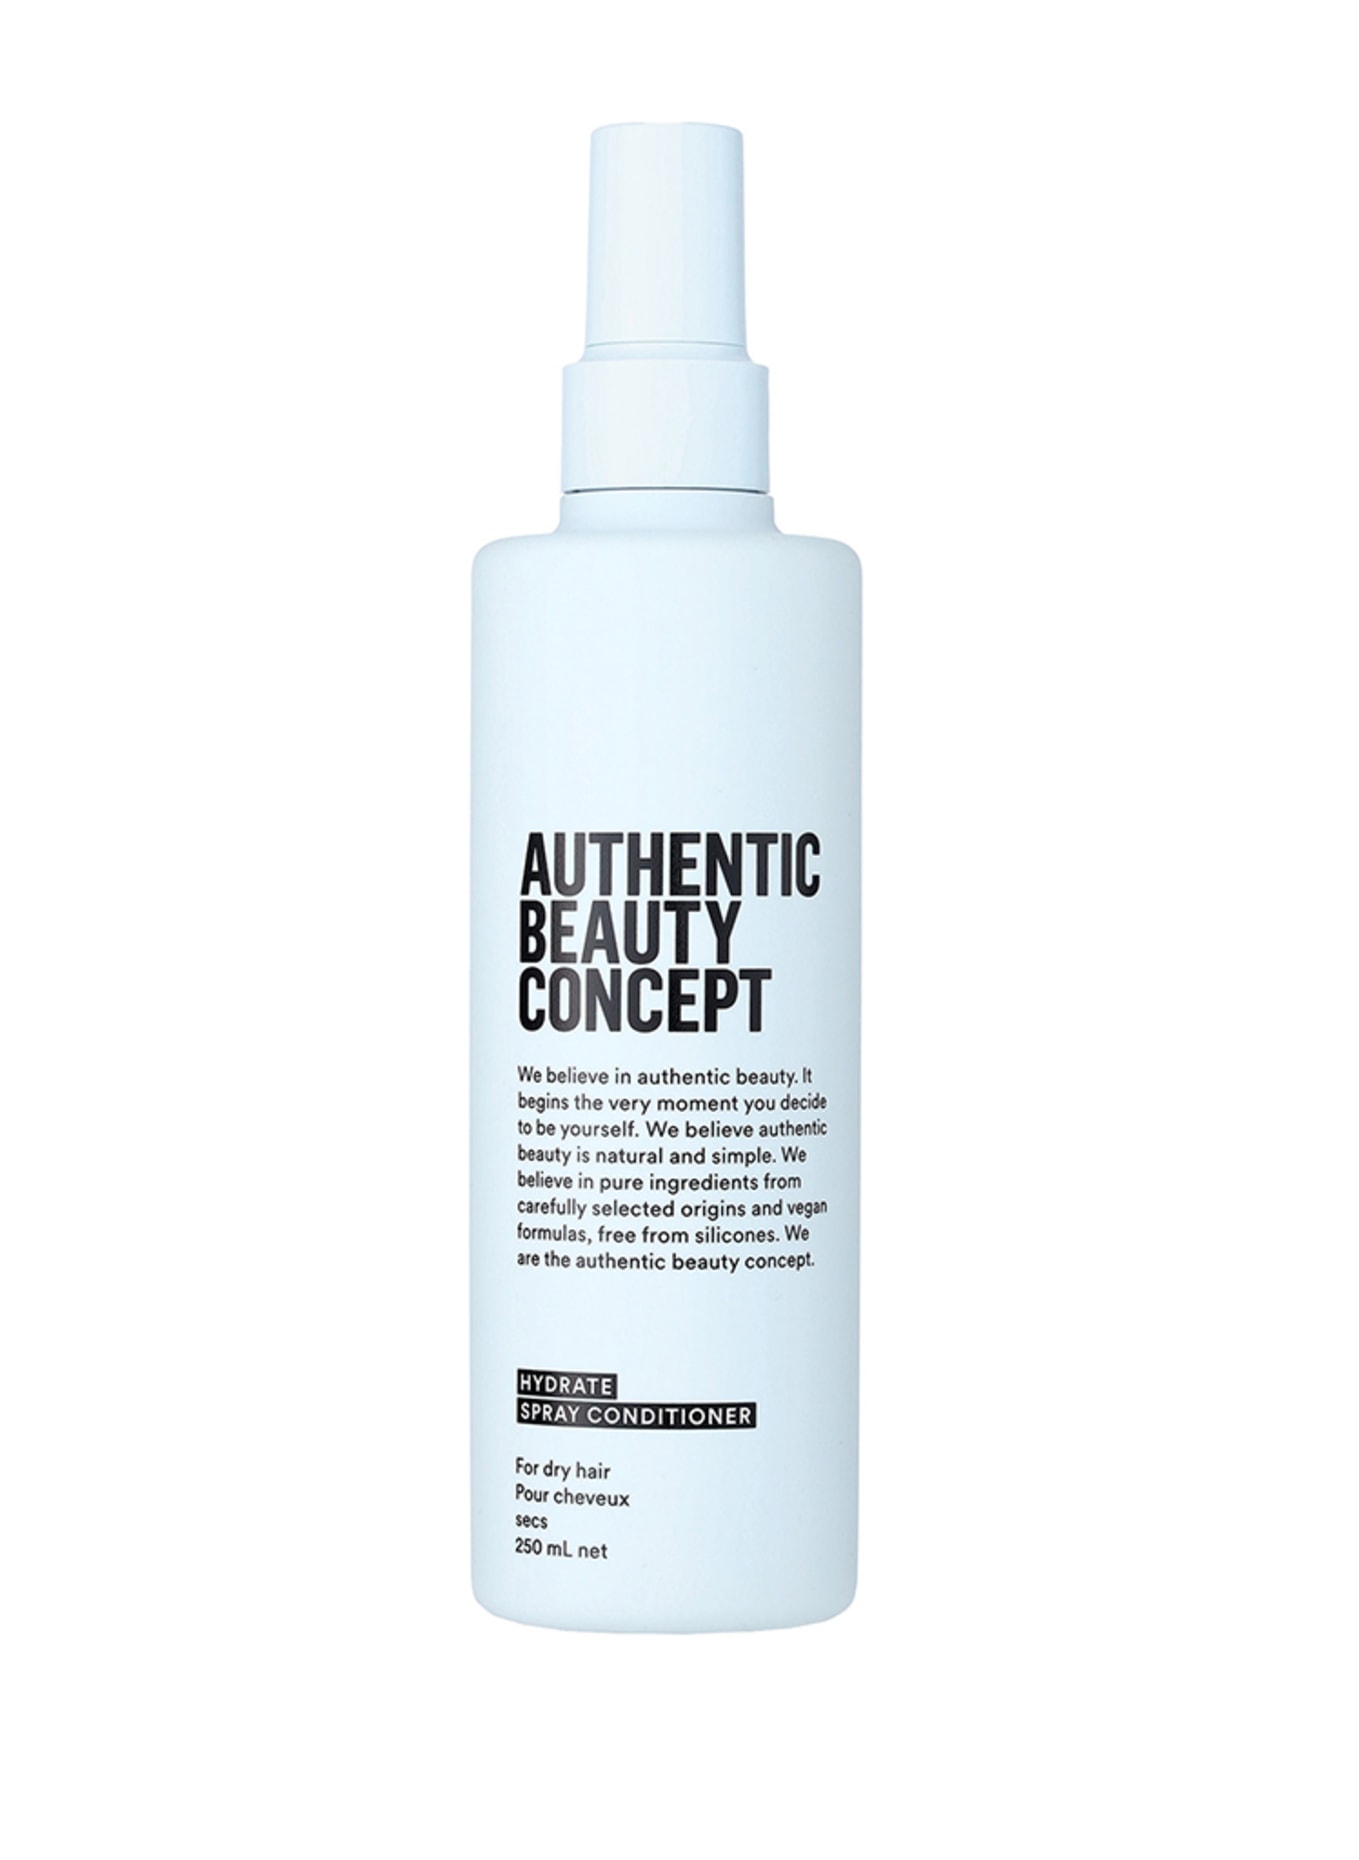 AUTHENTIC BEAUTY CONCEPT HYDRATE SPRAY CONDITIONER (Obrázek 1)